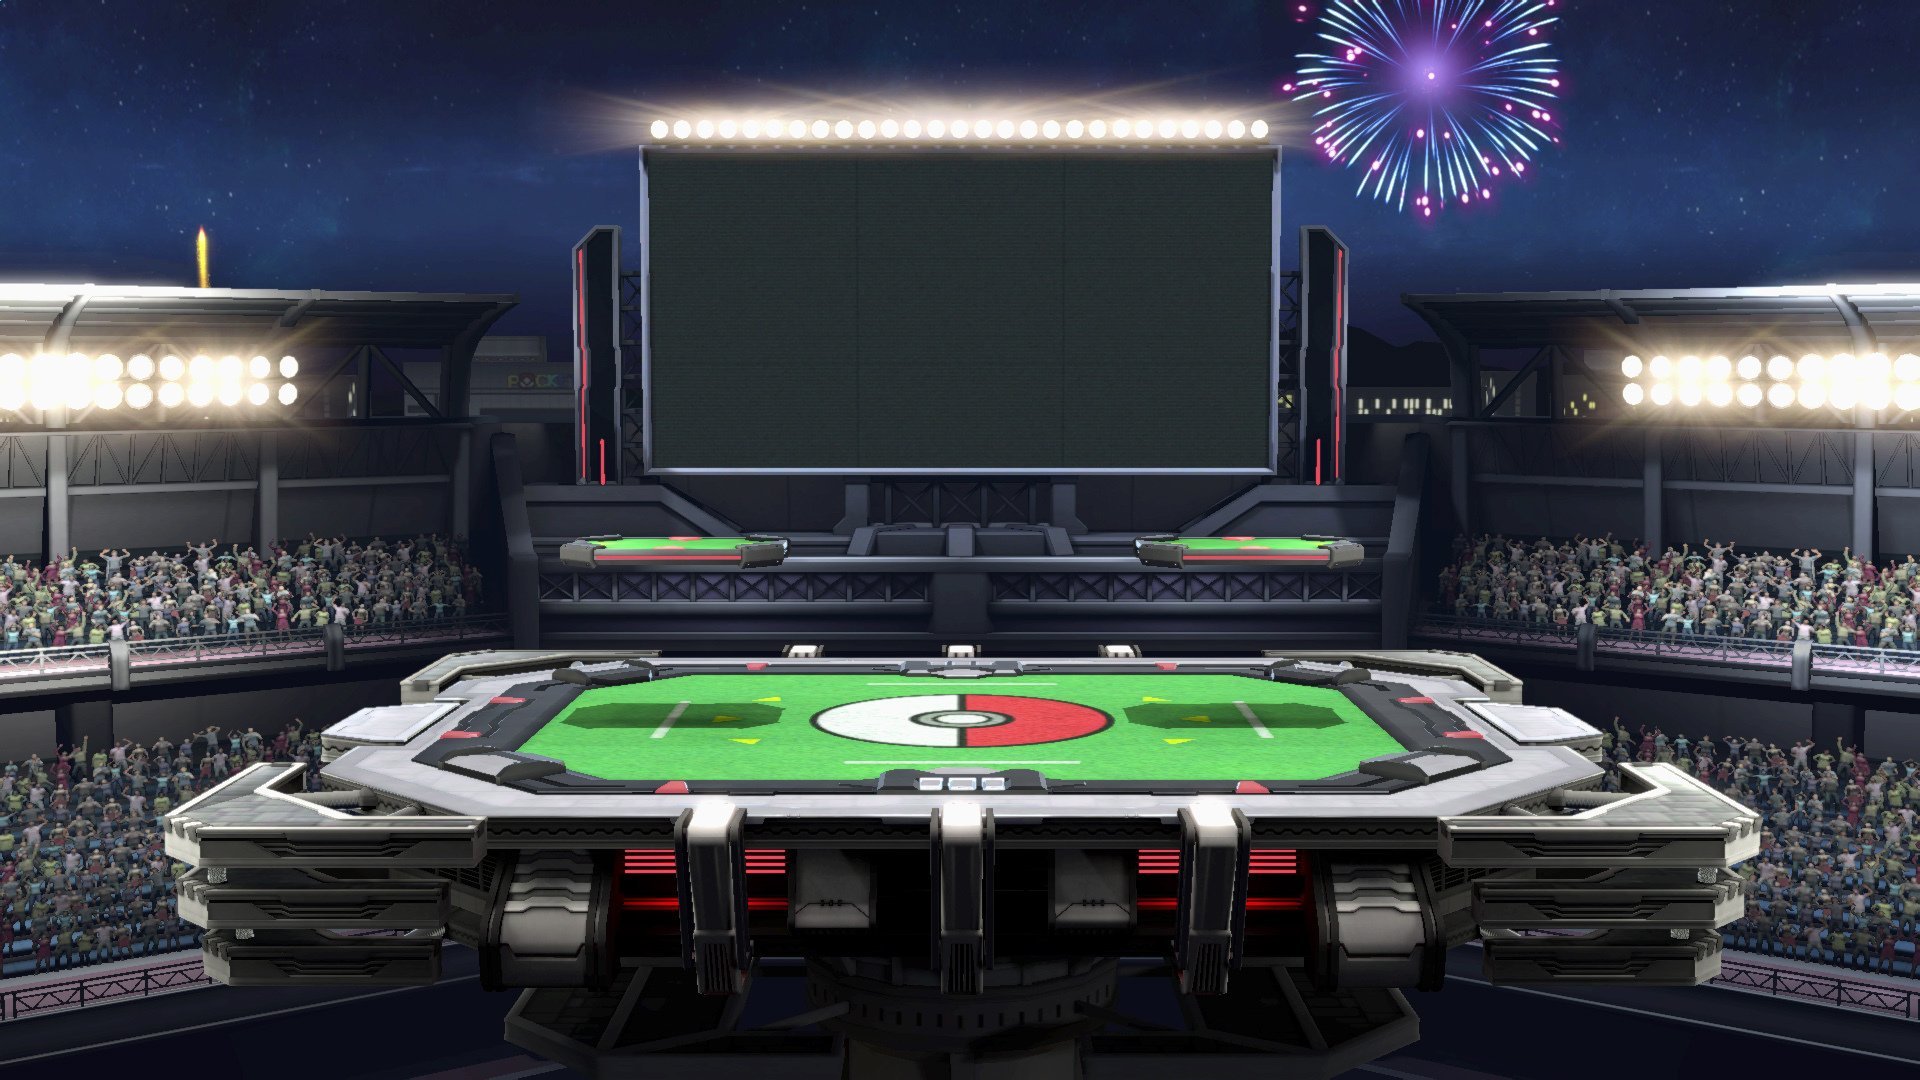 Nintendo Versus ten years, the original Pokémon Stadium stage returns to Super #SmashBrosUltimate! The environment switches between Fire, Water, Rock, and Grass, so you'll have to adapt to the